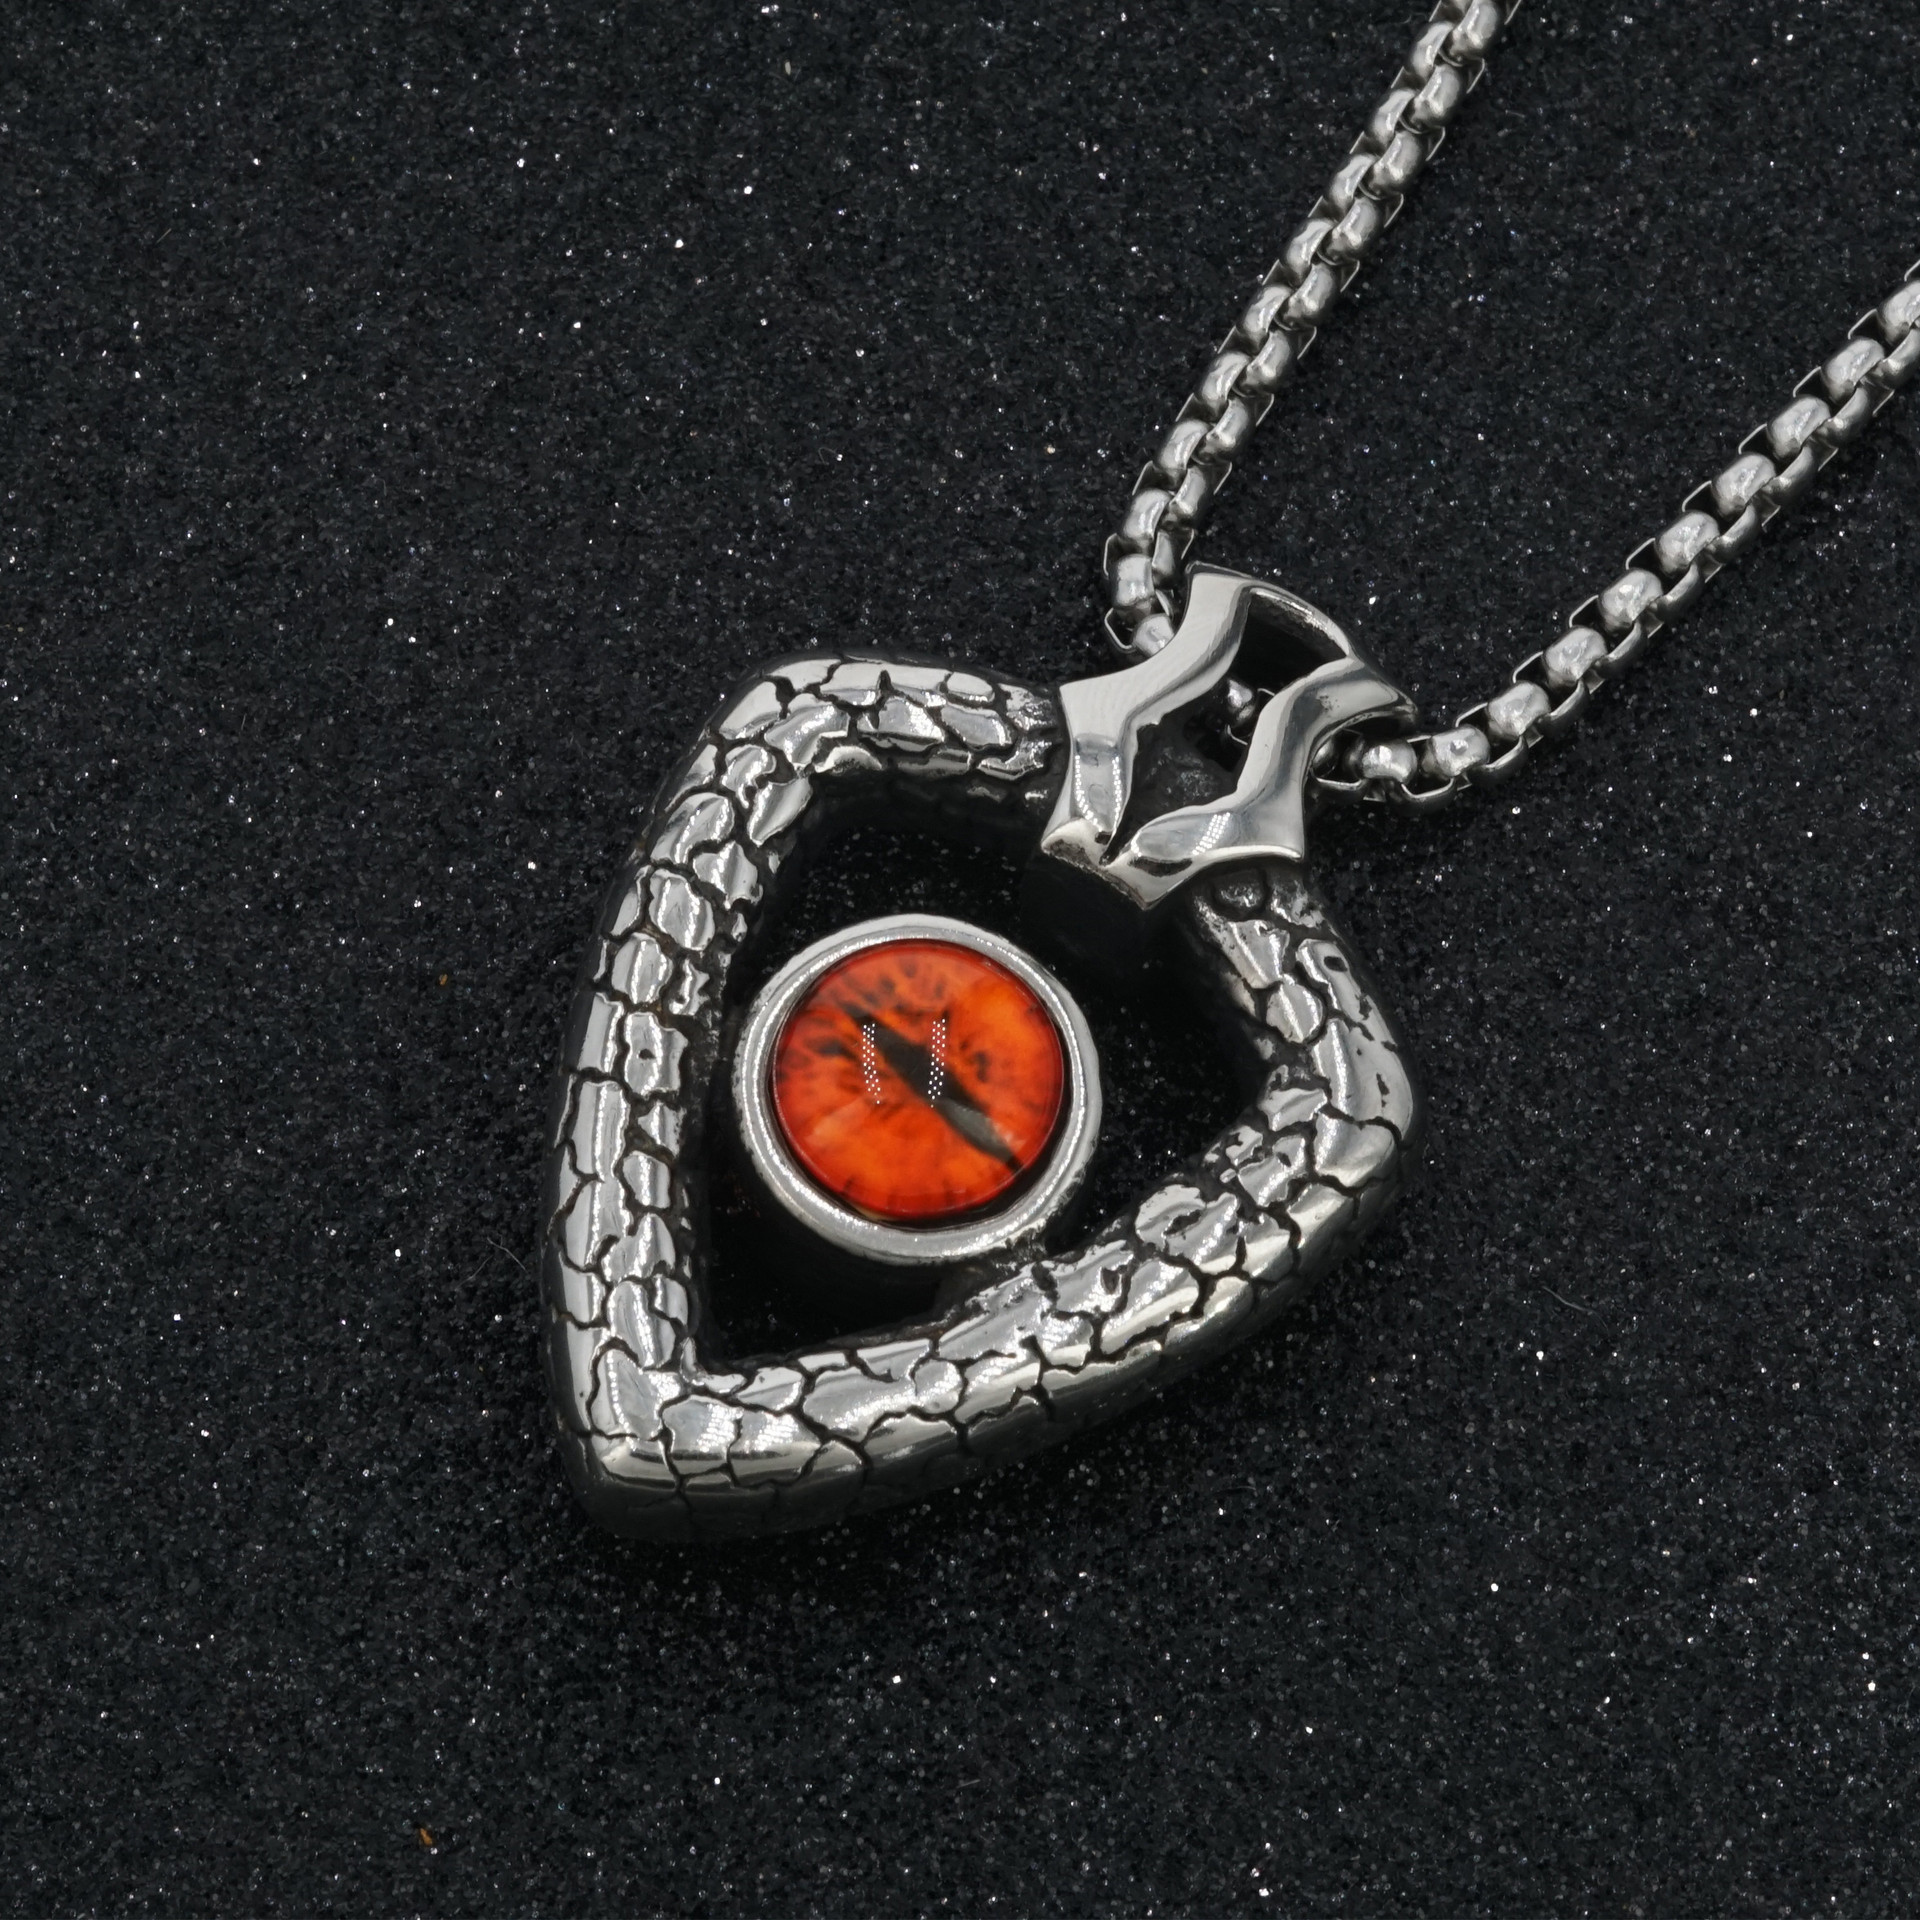 Red Eye single pendant without chain